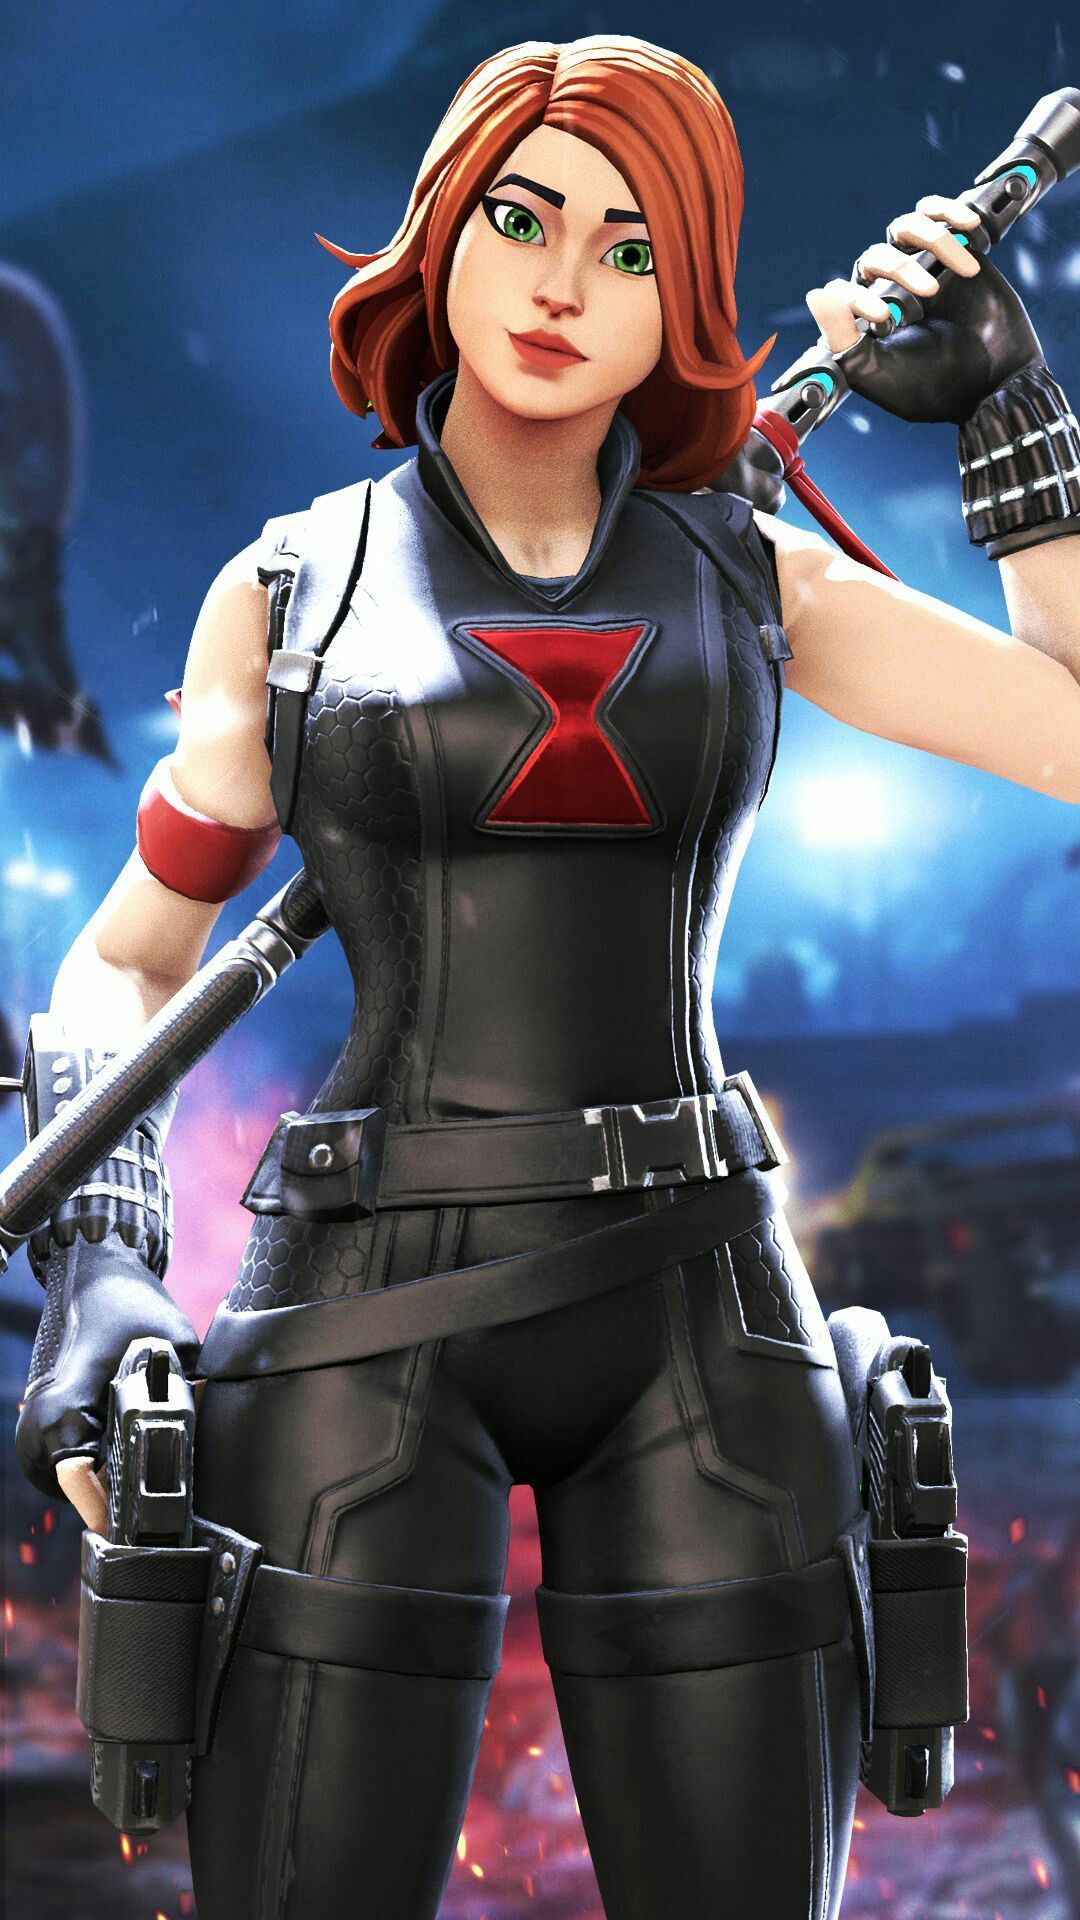 So pretty I wish I could've got her red hair beauty. Best gaming